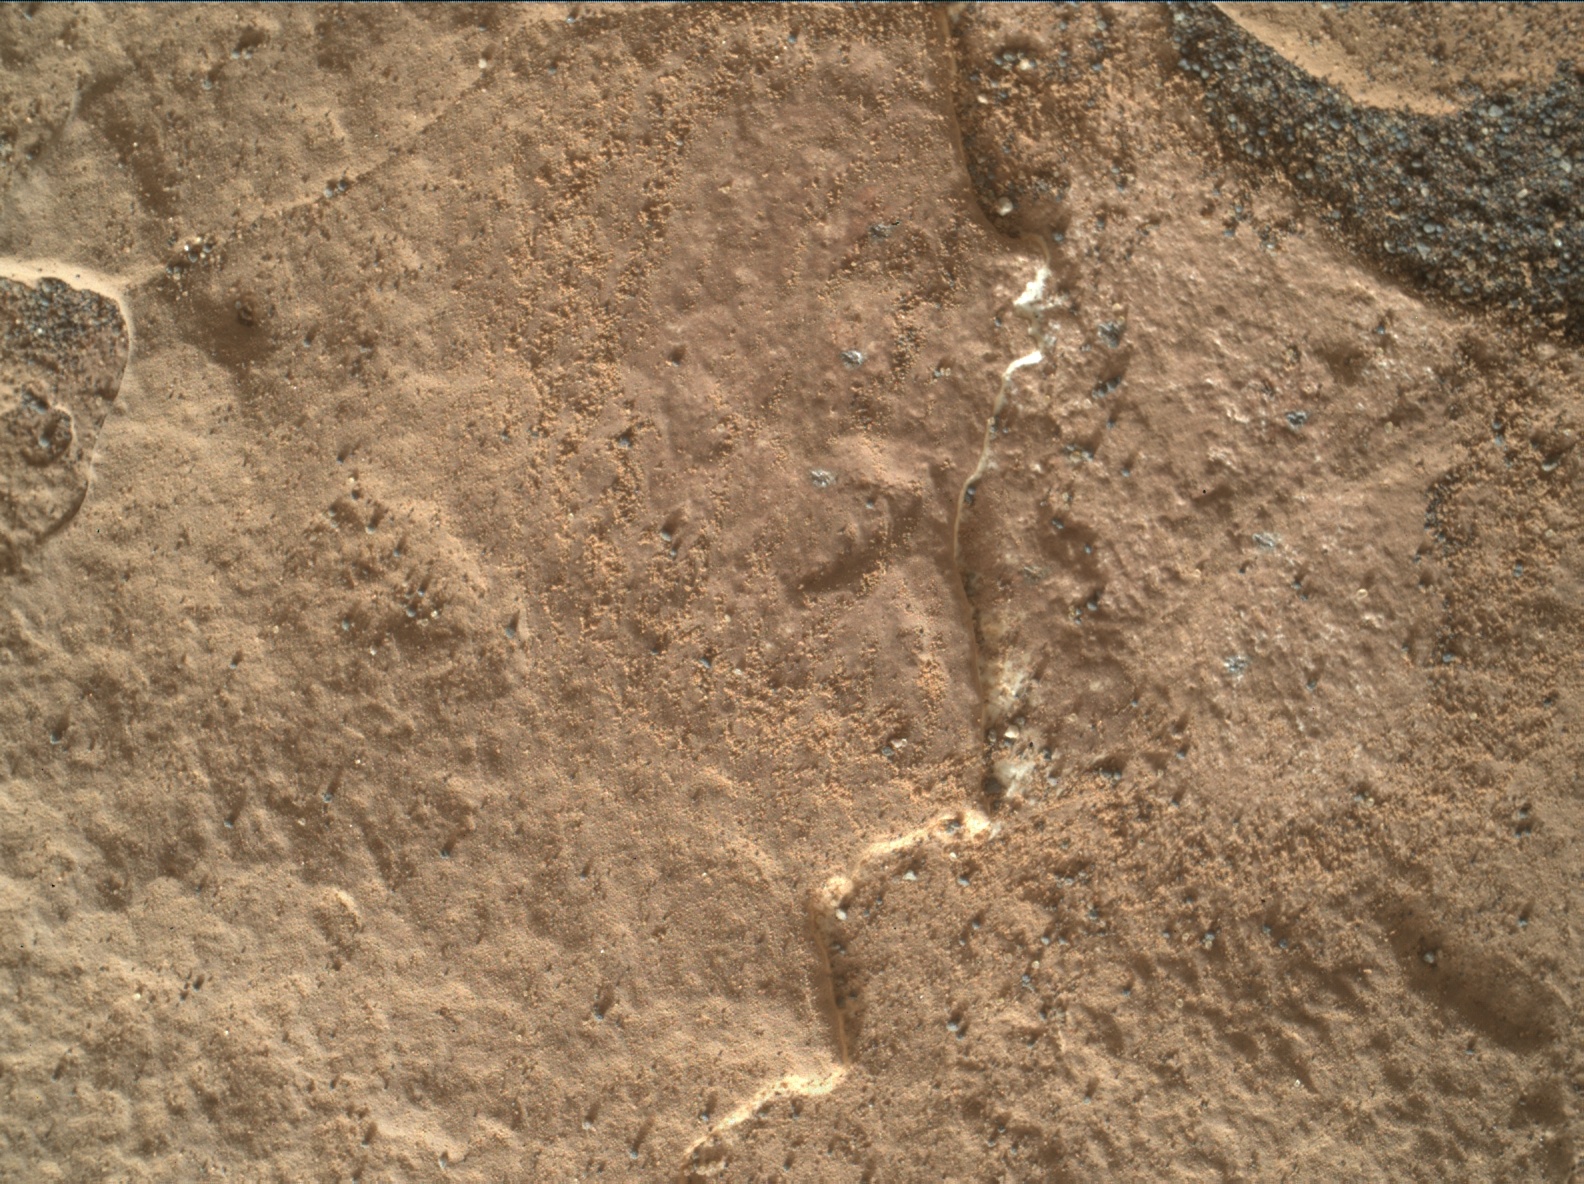 Nasa's Mars rover Curiosity acquired this image using its Mars Hand Lens Imager (MAHLI) on Sol 1797